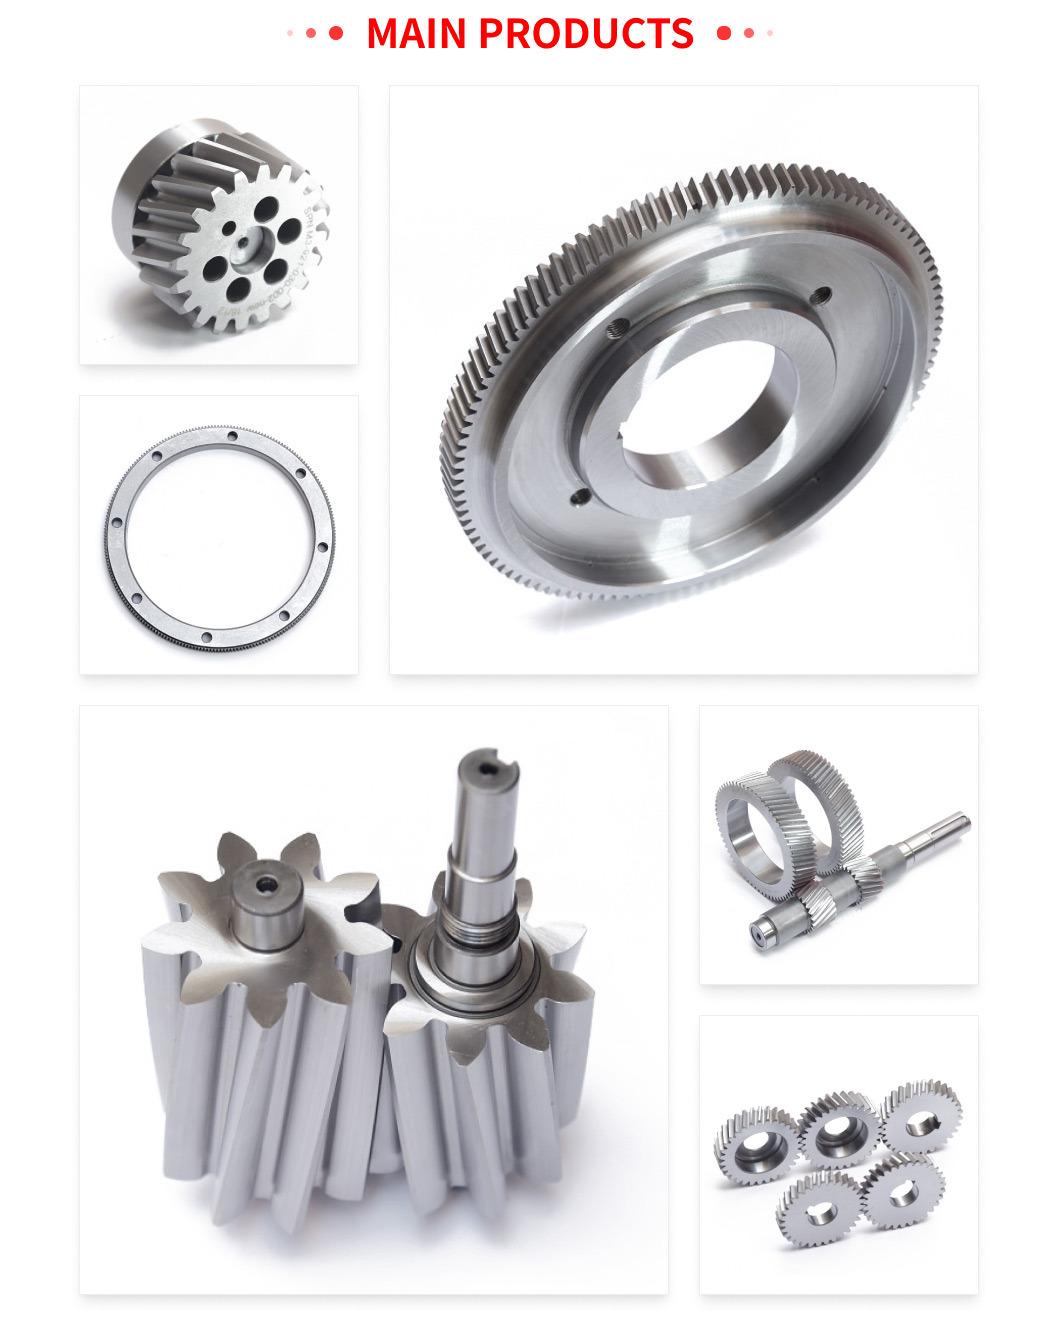 Hot Cast Steel Spur OEM Helical Rack Gears Transmission Cement Mixer Shaft Gear